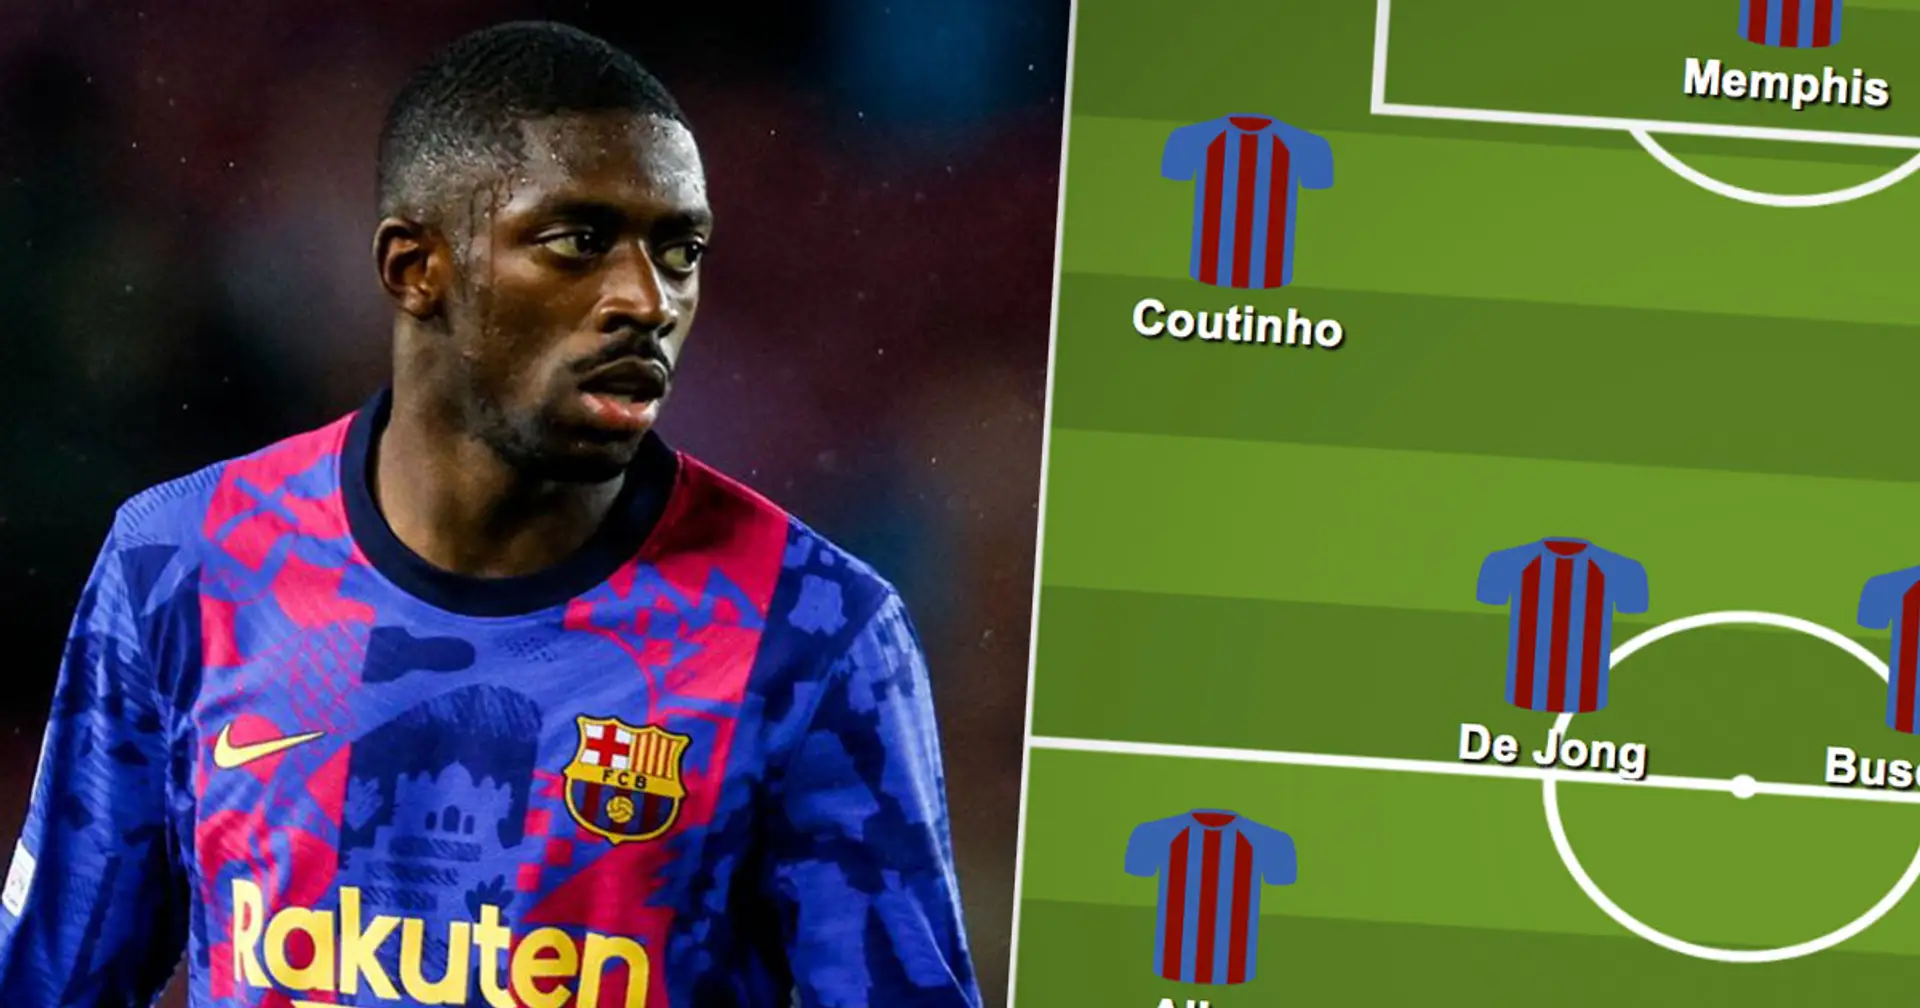 Dembele in? Select ultimate XI for Villarreal clash from 3 options